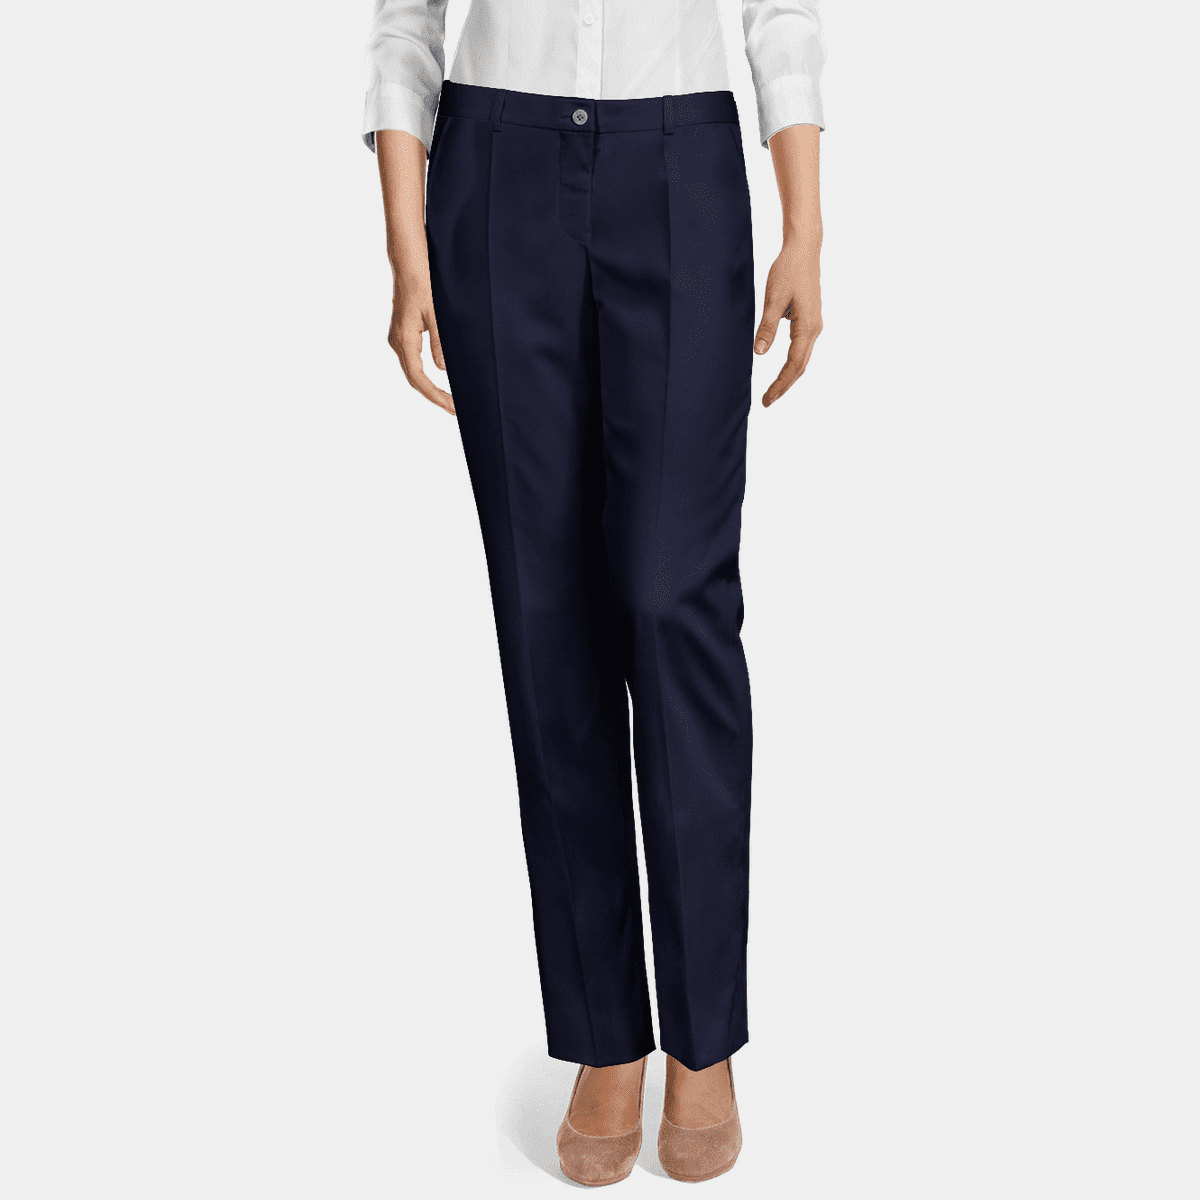 Women's Dress Pants  100% Made to measure - Sumissura